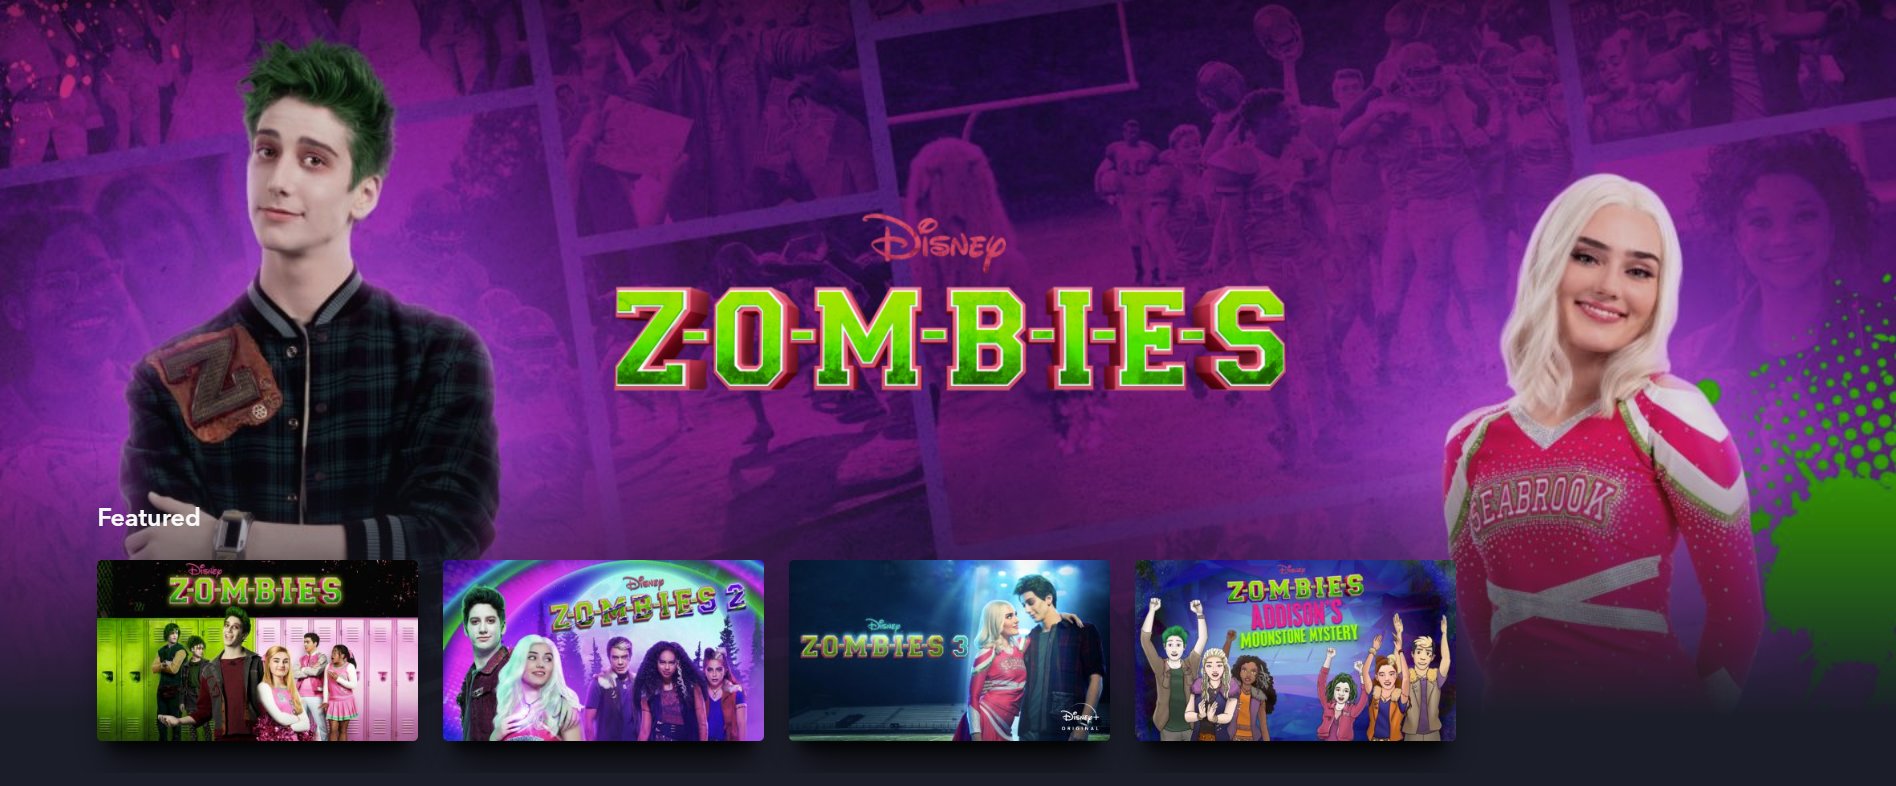 Disney ZOMBIES 3   STREAMING NOW on Twitter Check out the new cover of  the book Disney Zombies Welcome to Seabrook which goes on sale on July  19 2022  ZOMBIES3 httpstco98nTfwqzQS  Twitter